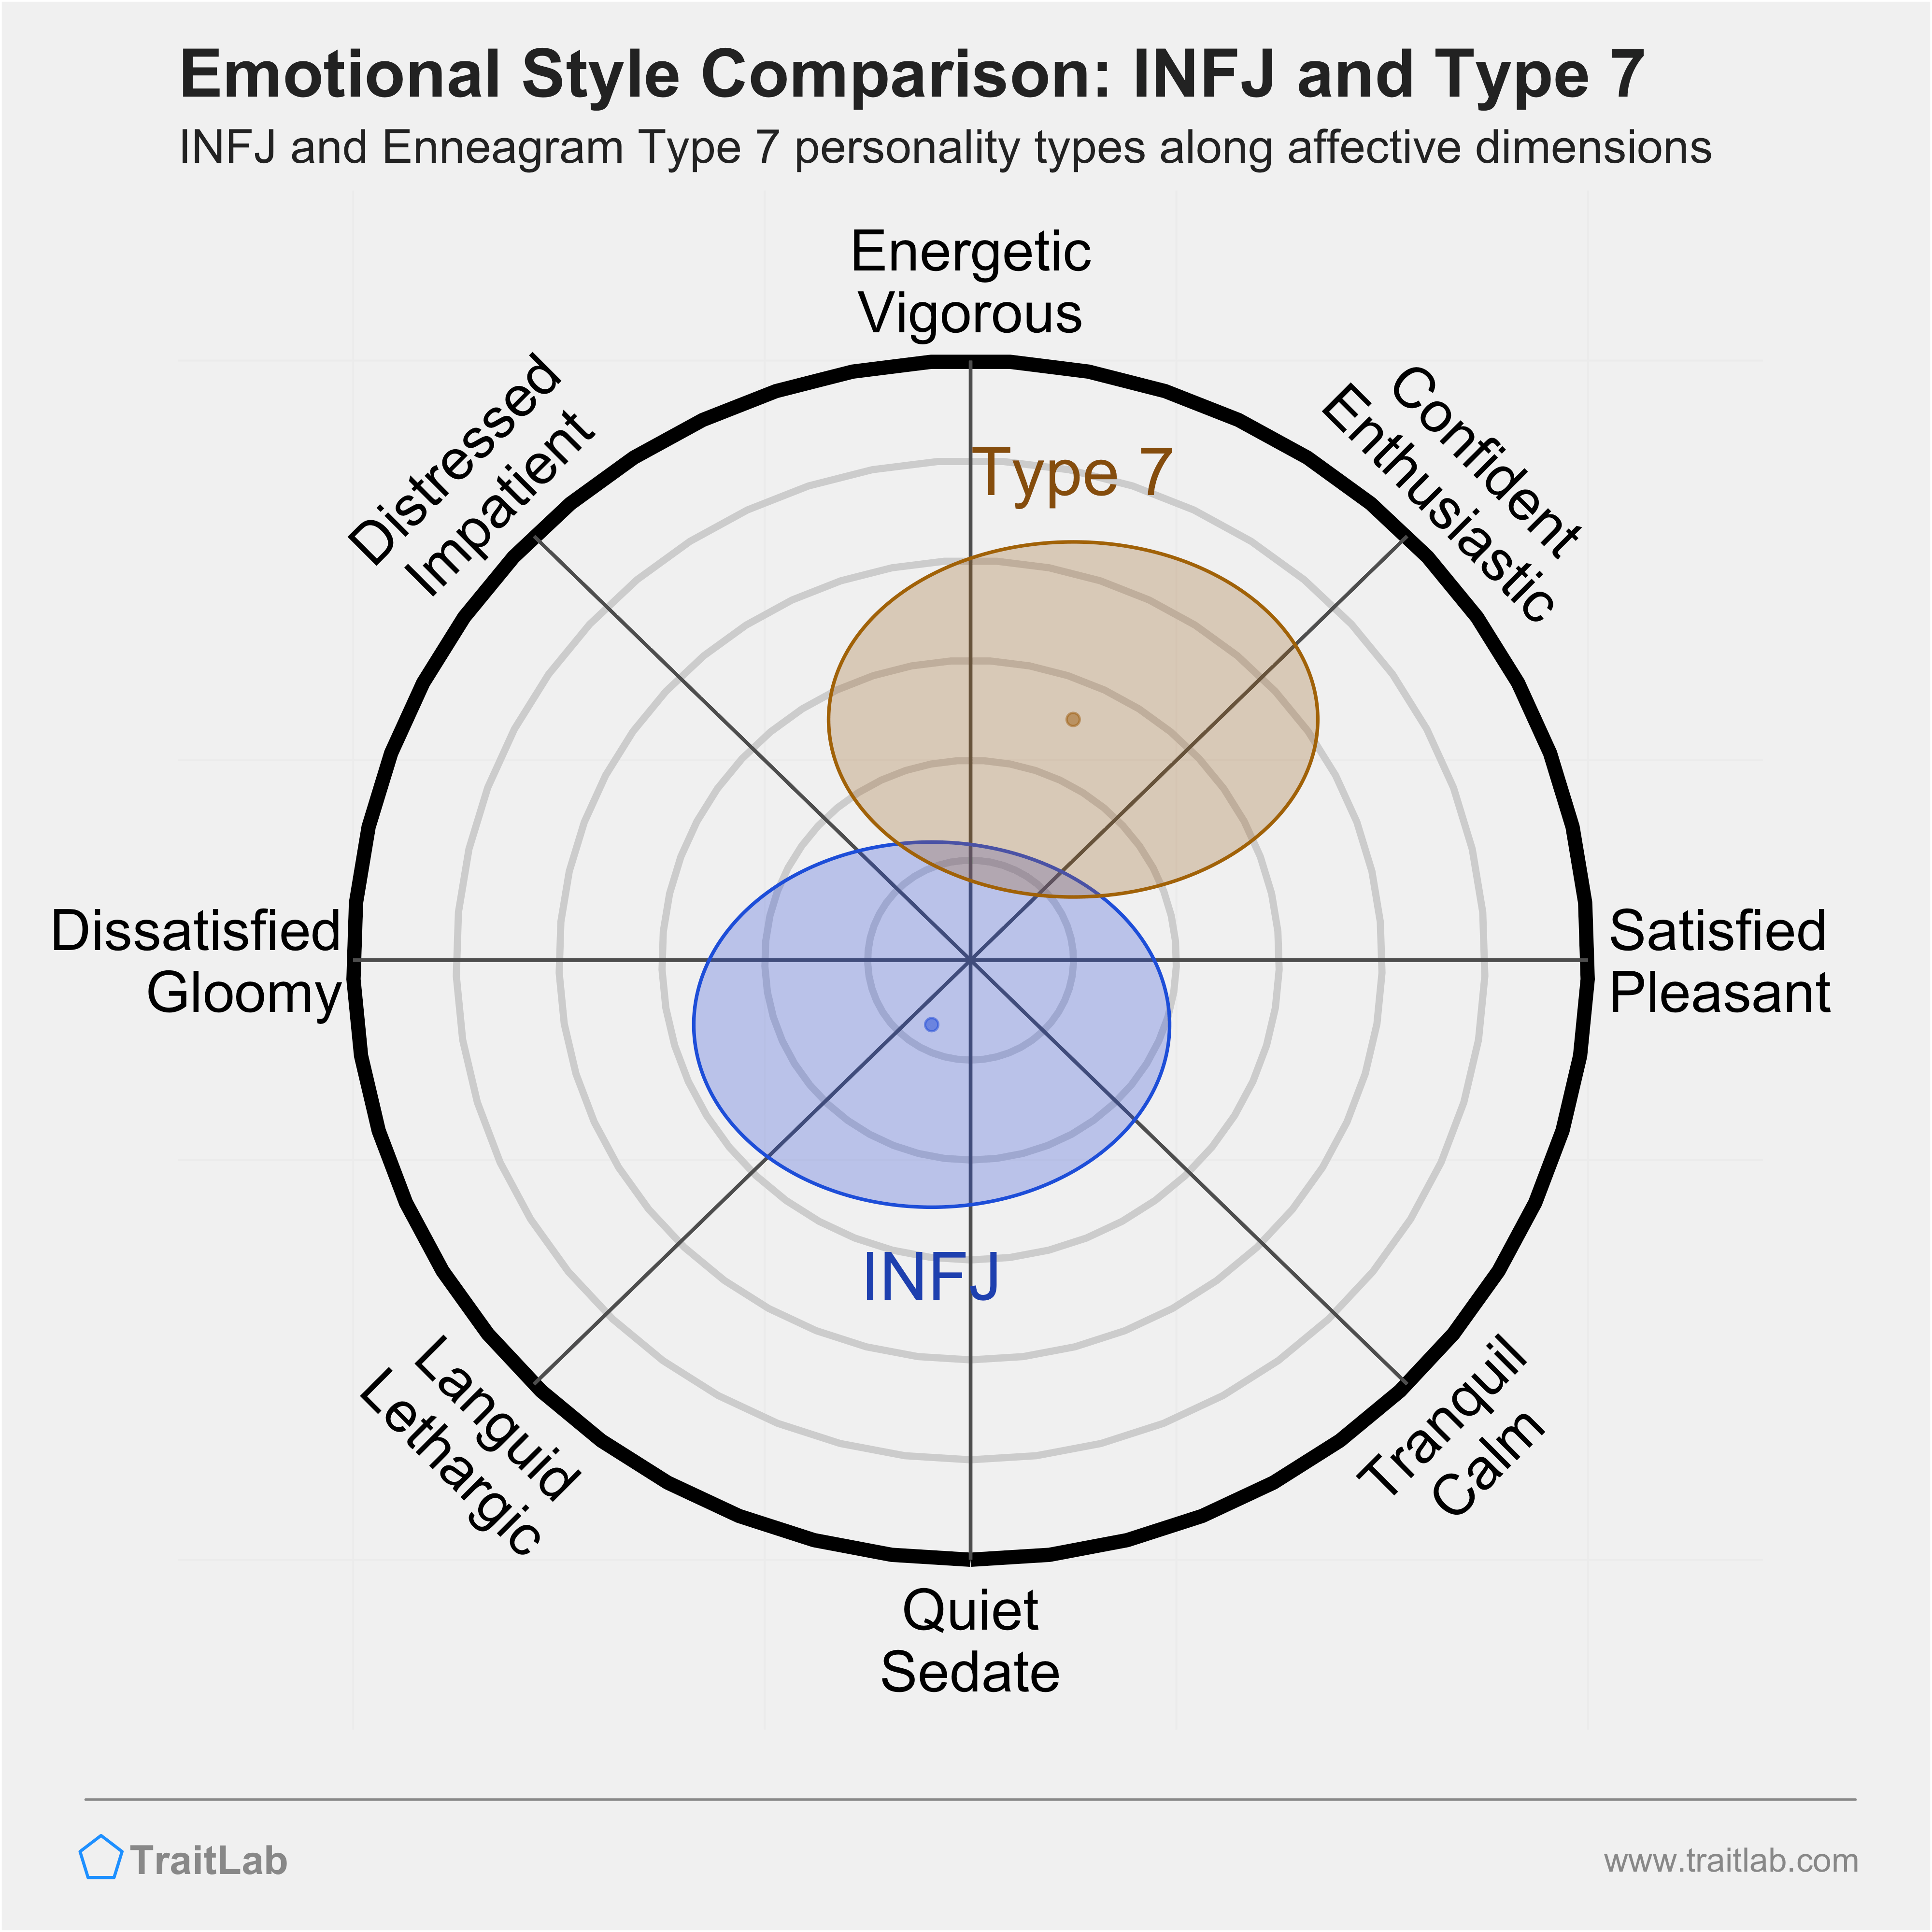 INFJ and Type 7 comparison across emotional (affective) dimensions